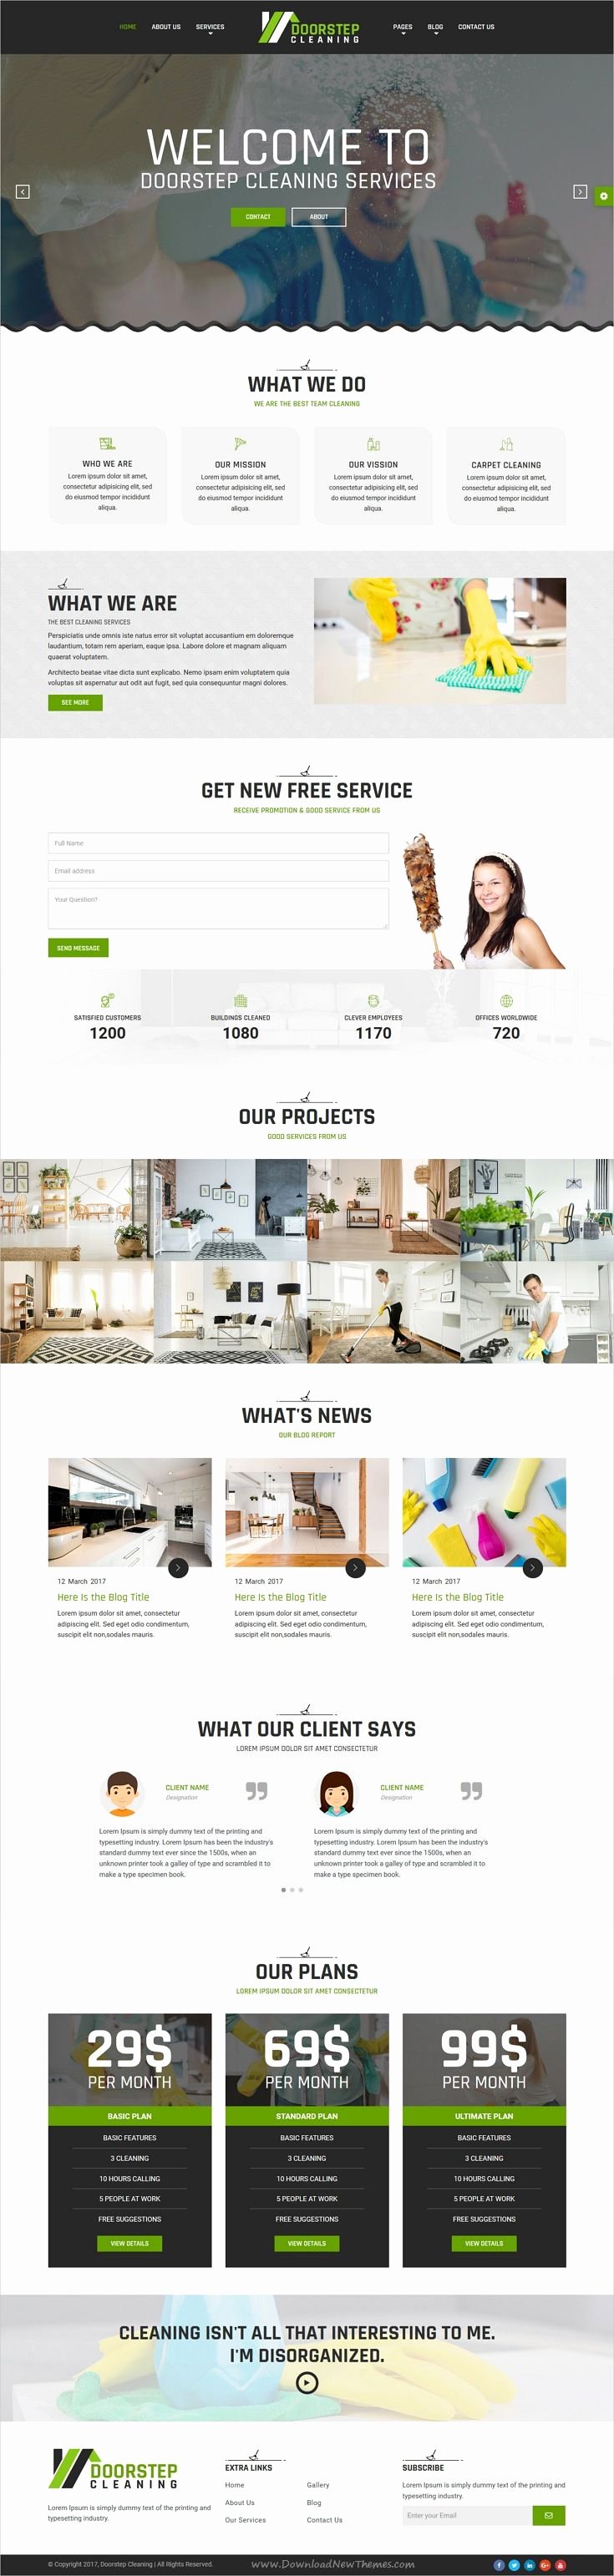 Cleaning Services Website Template Inspirational Best 25 Cleaning Services Ideas On Pinterest